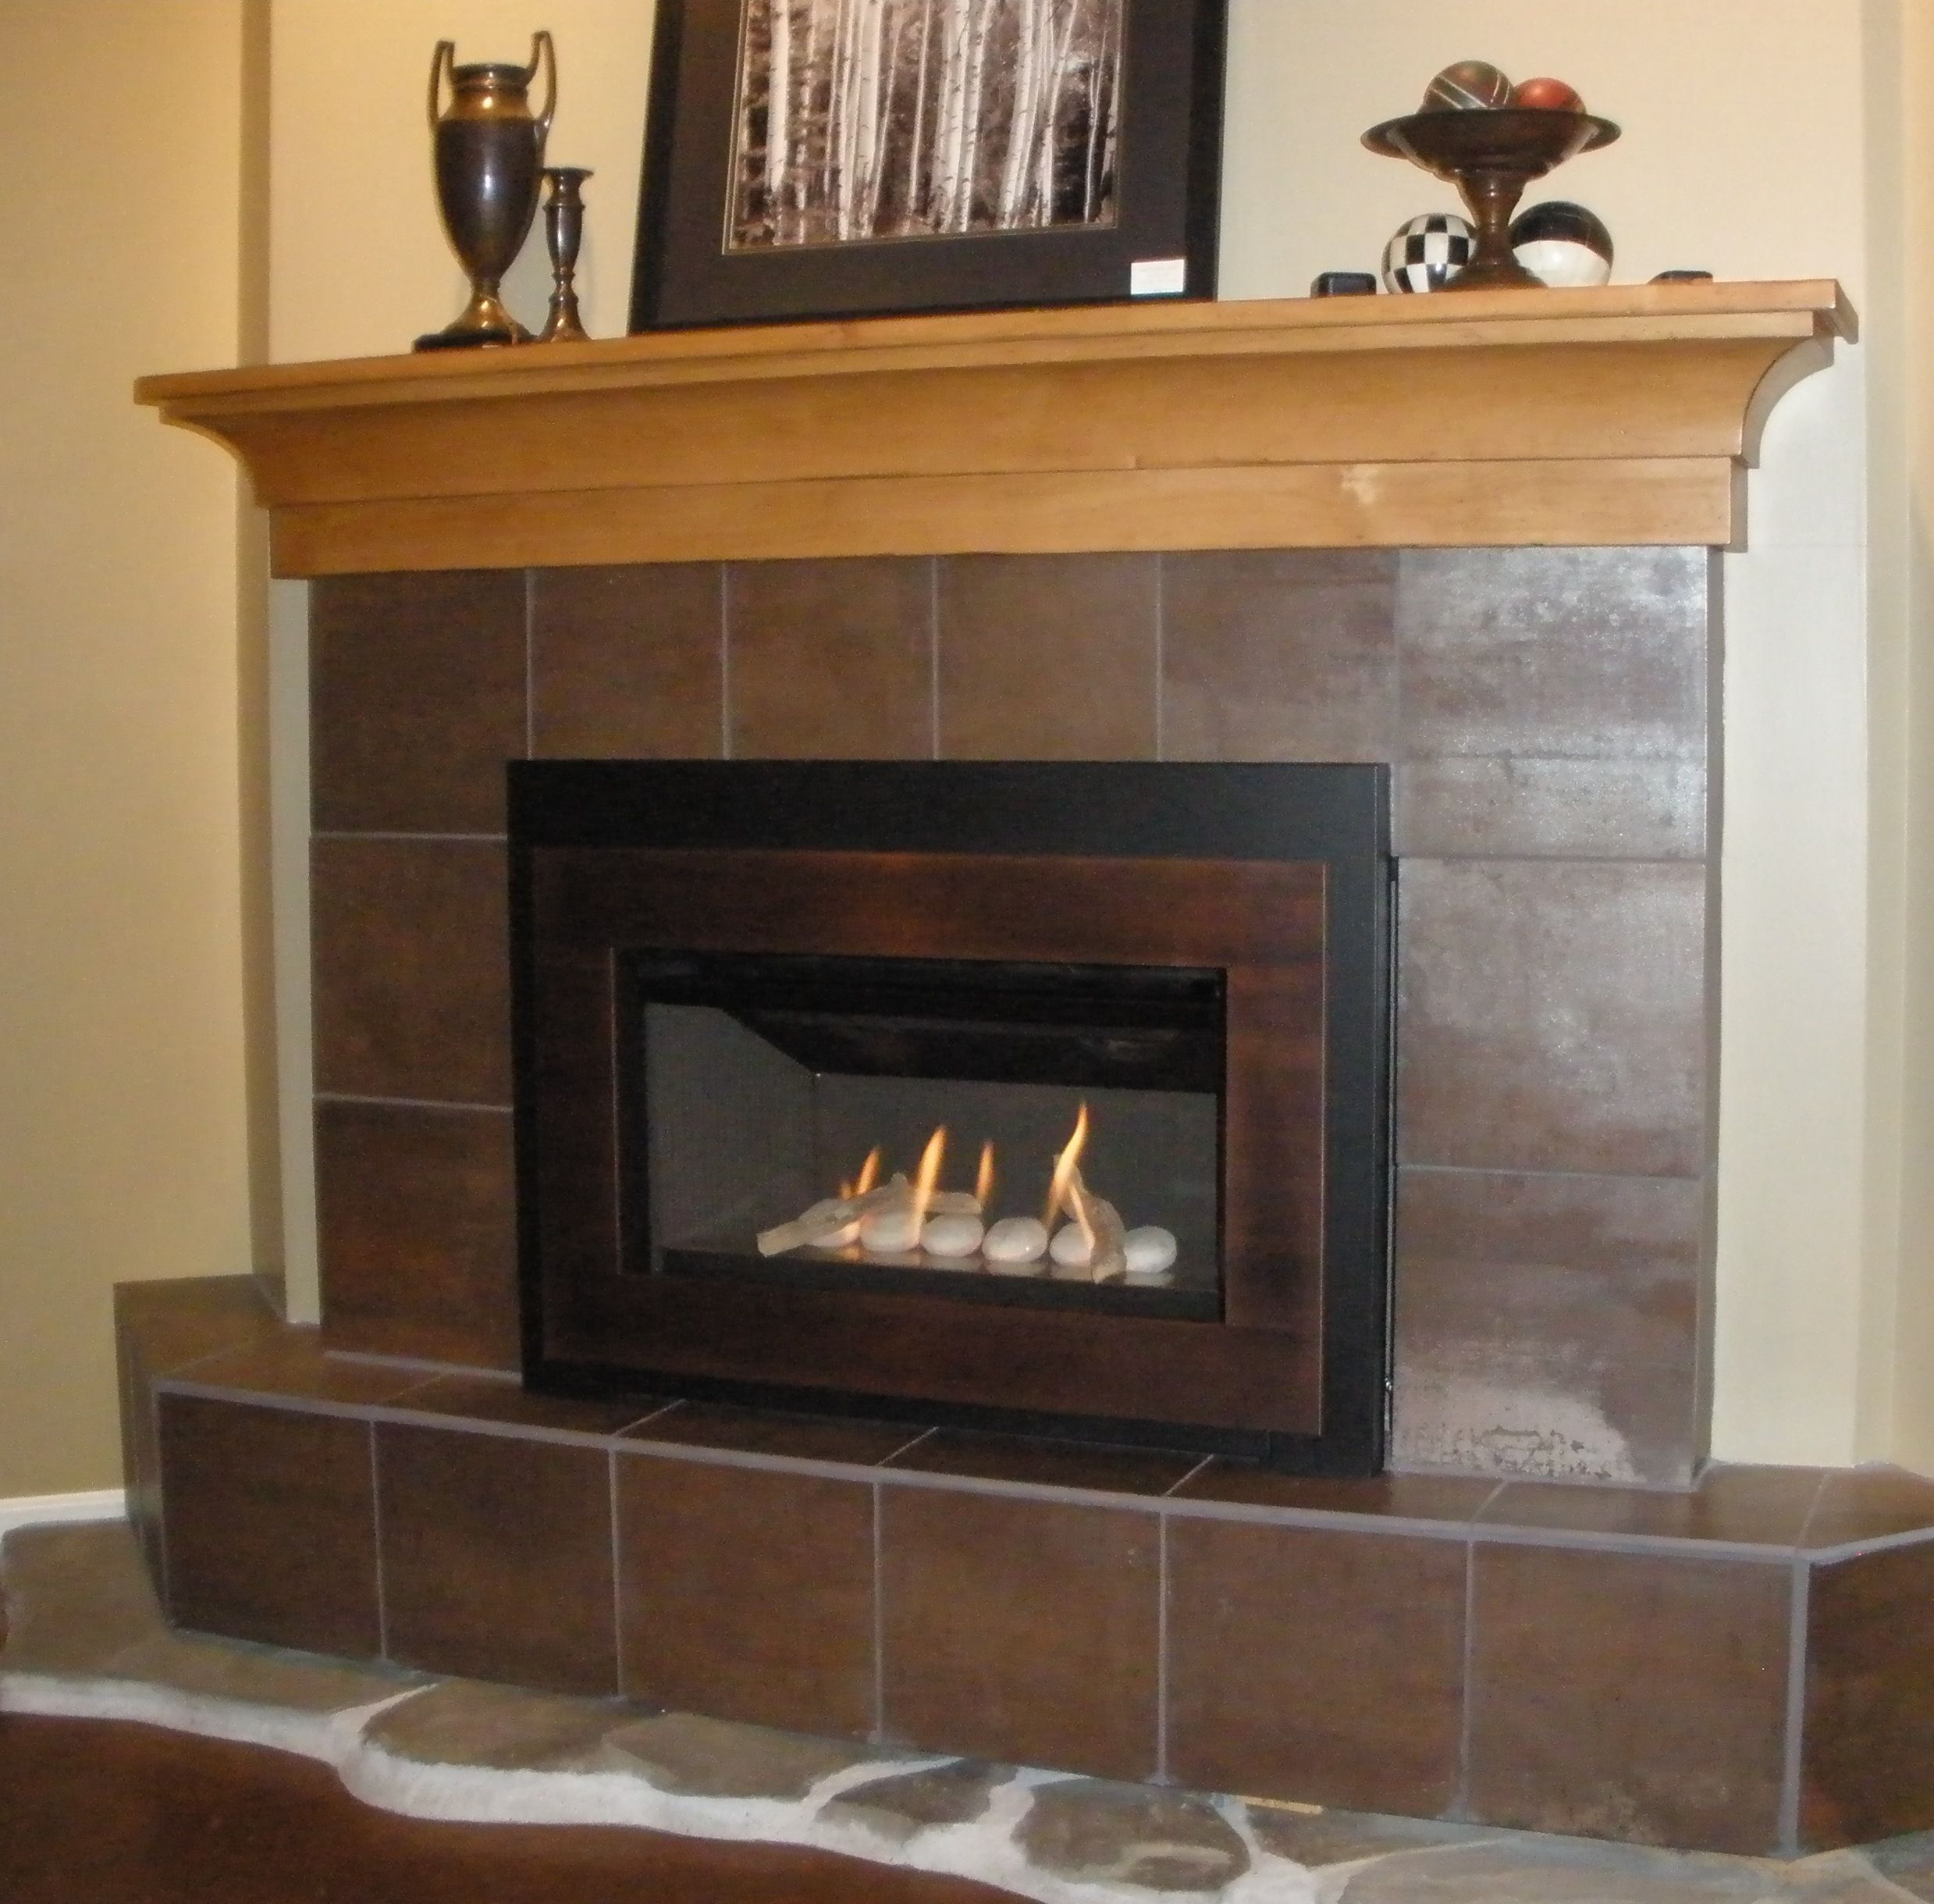 Fireplace Draft Blocker Beautiful Pin On Valor Radiant Gas Fireplaces Midwest Dealer